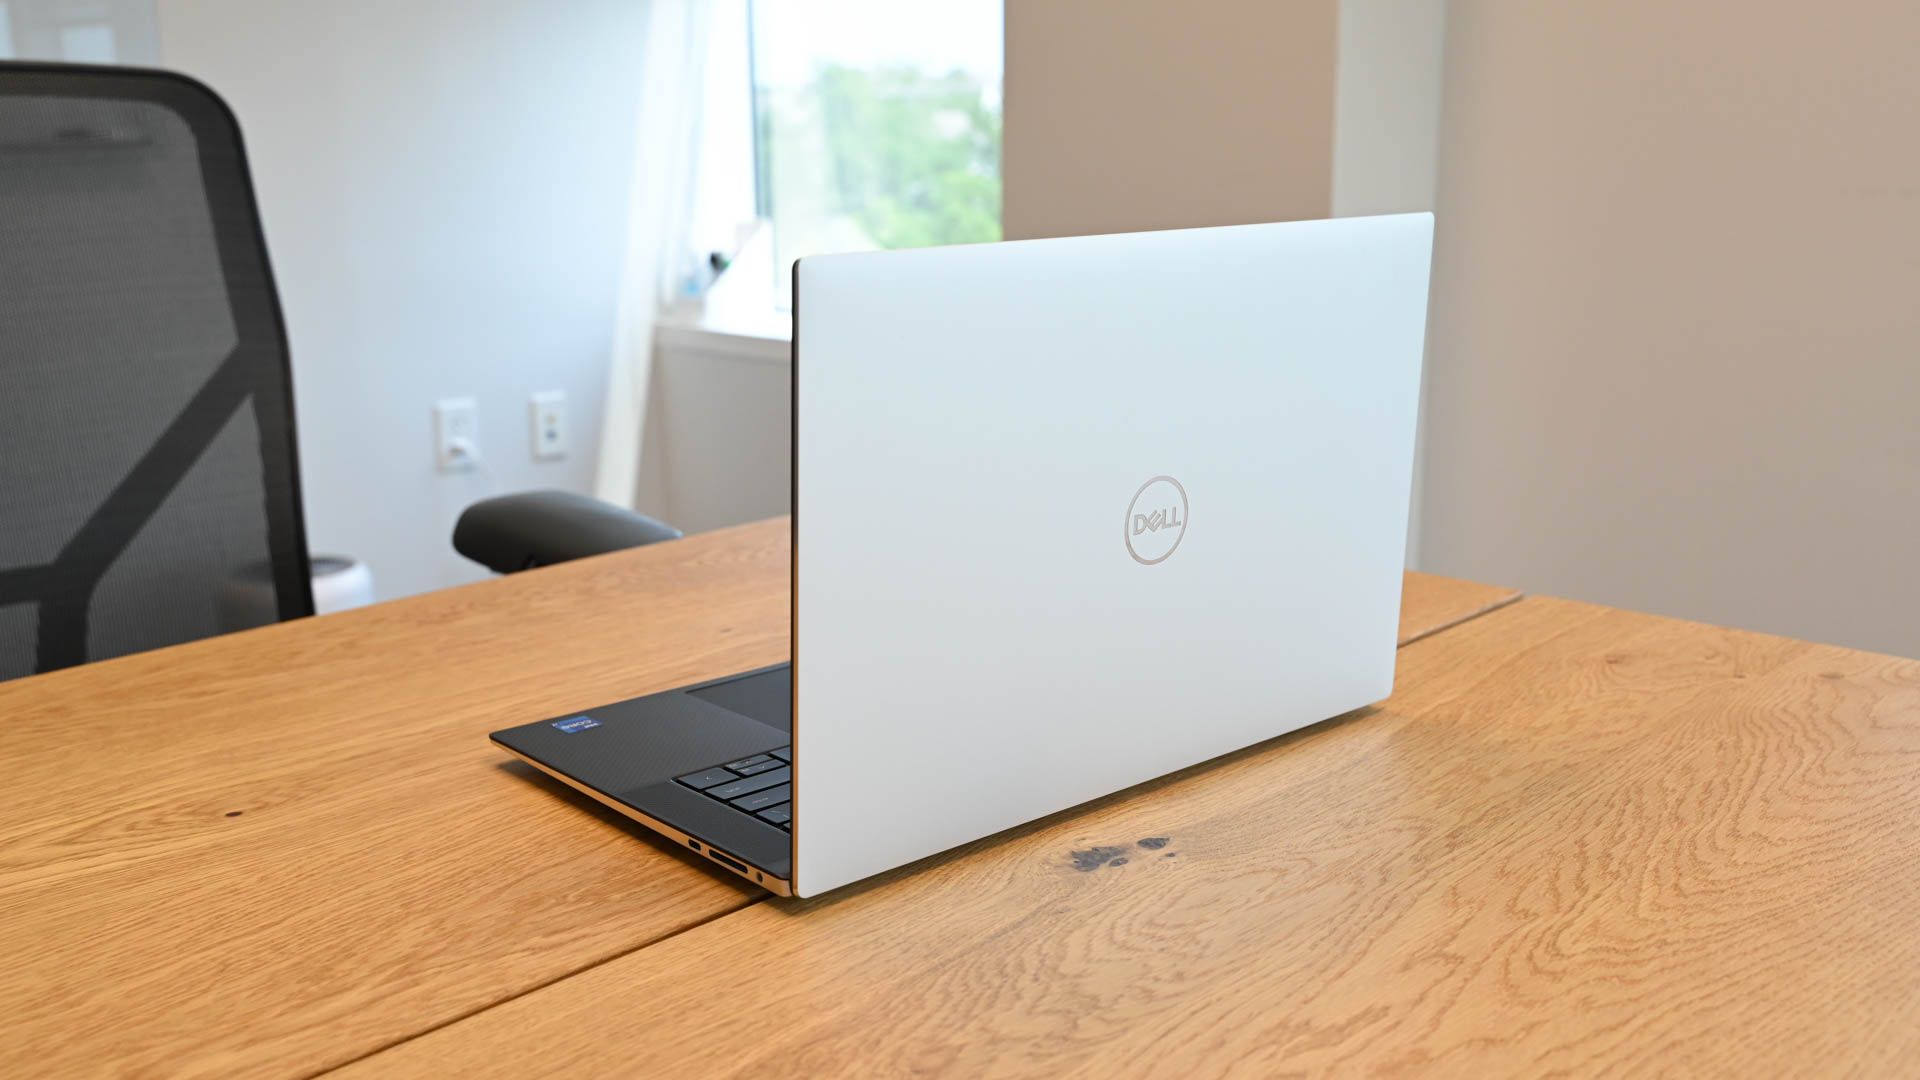 Rear view of the Dell XPS 15 (9530) laptop on a conference table.